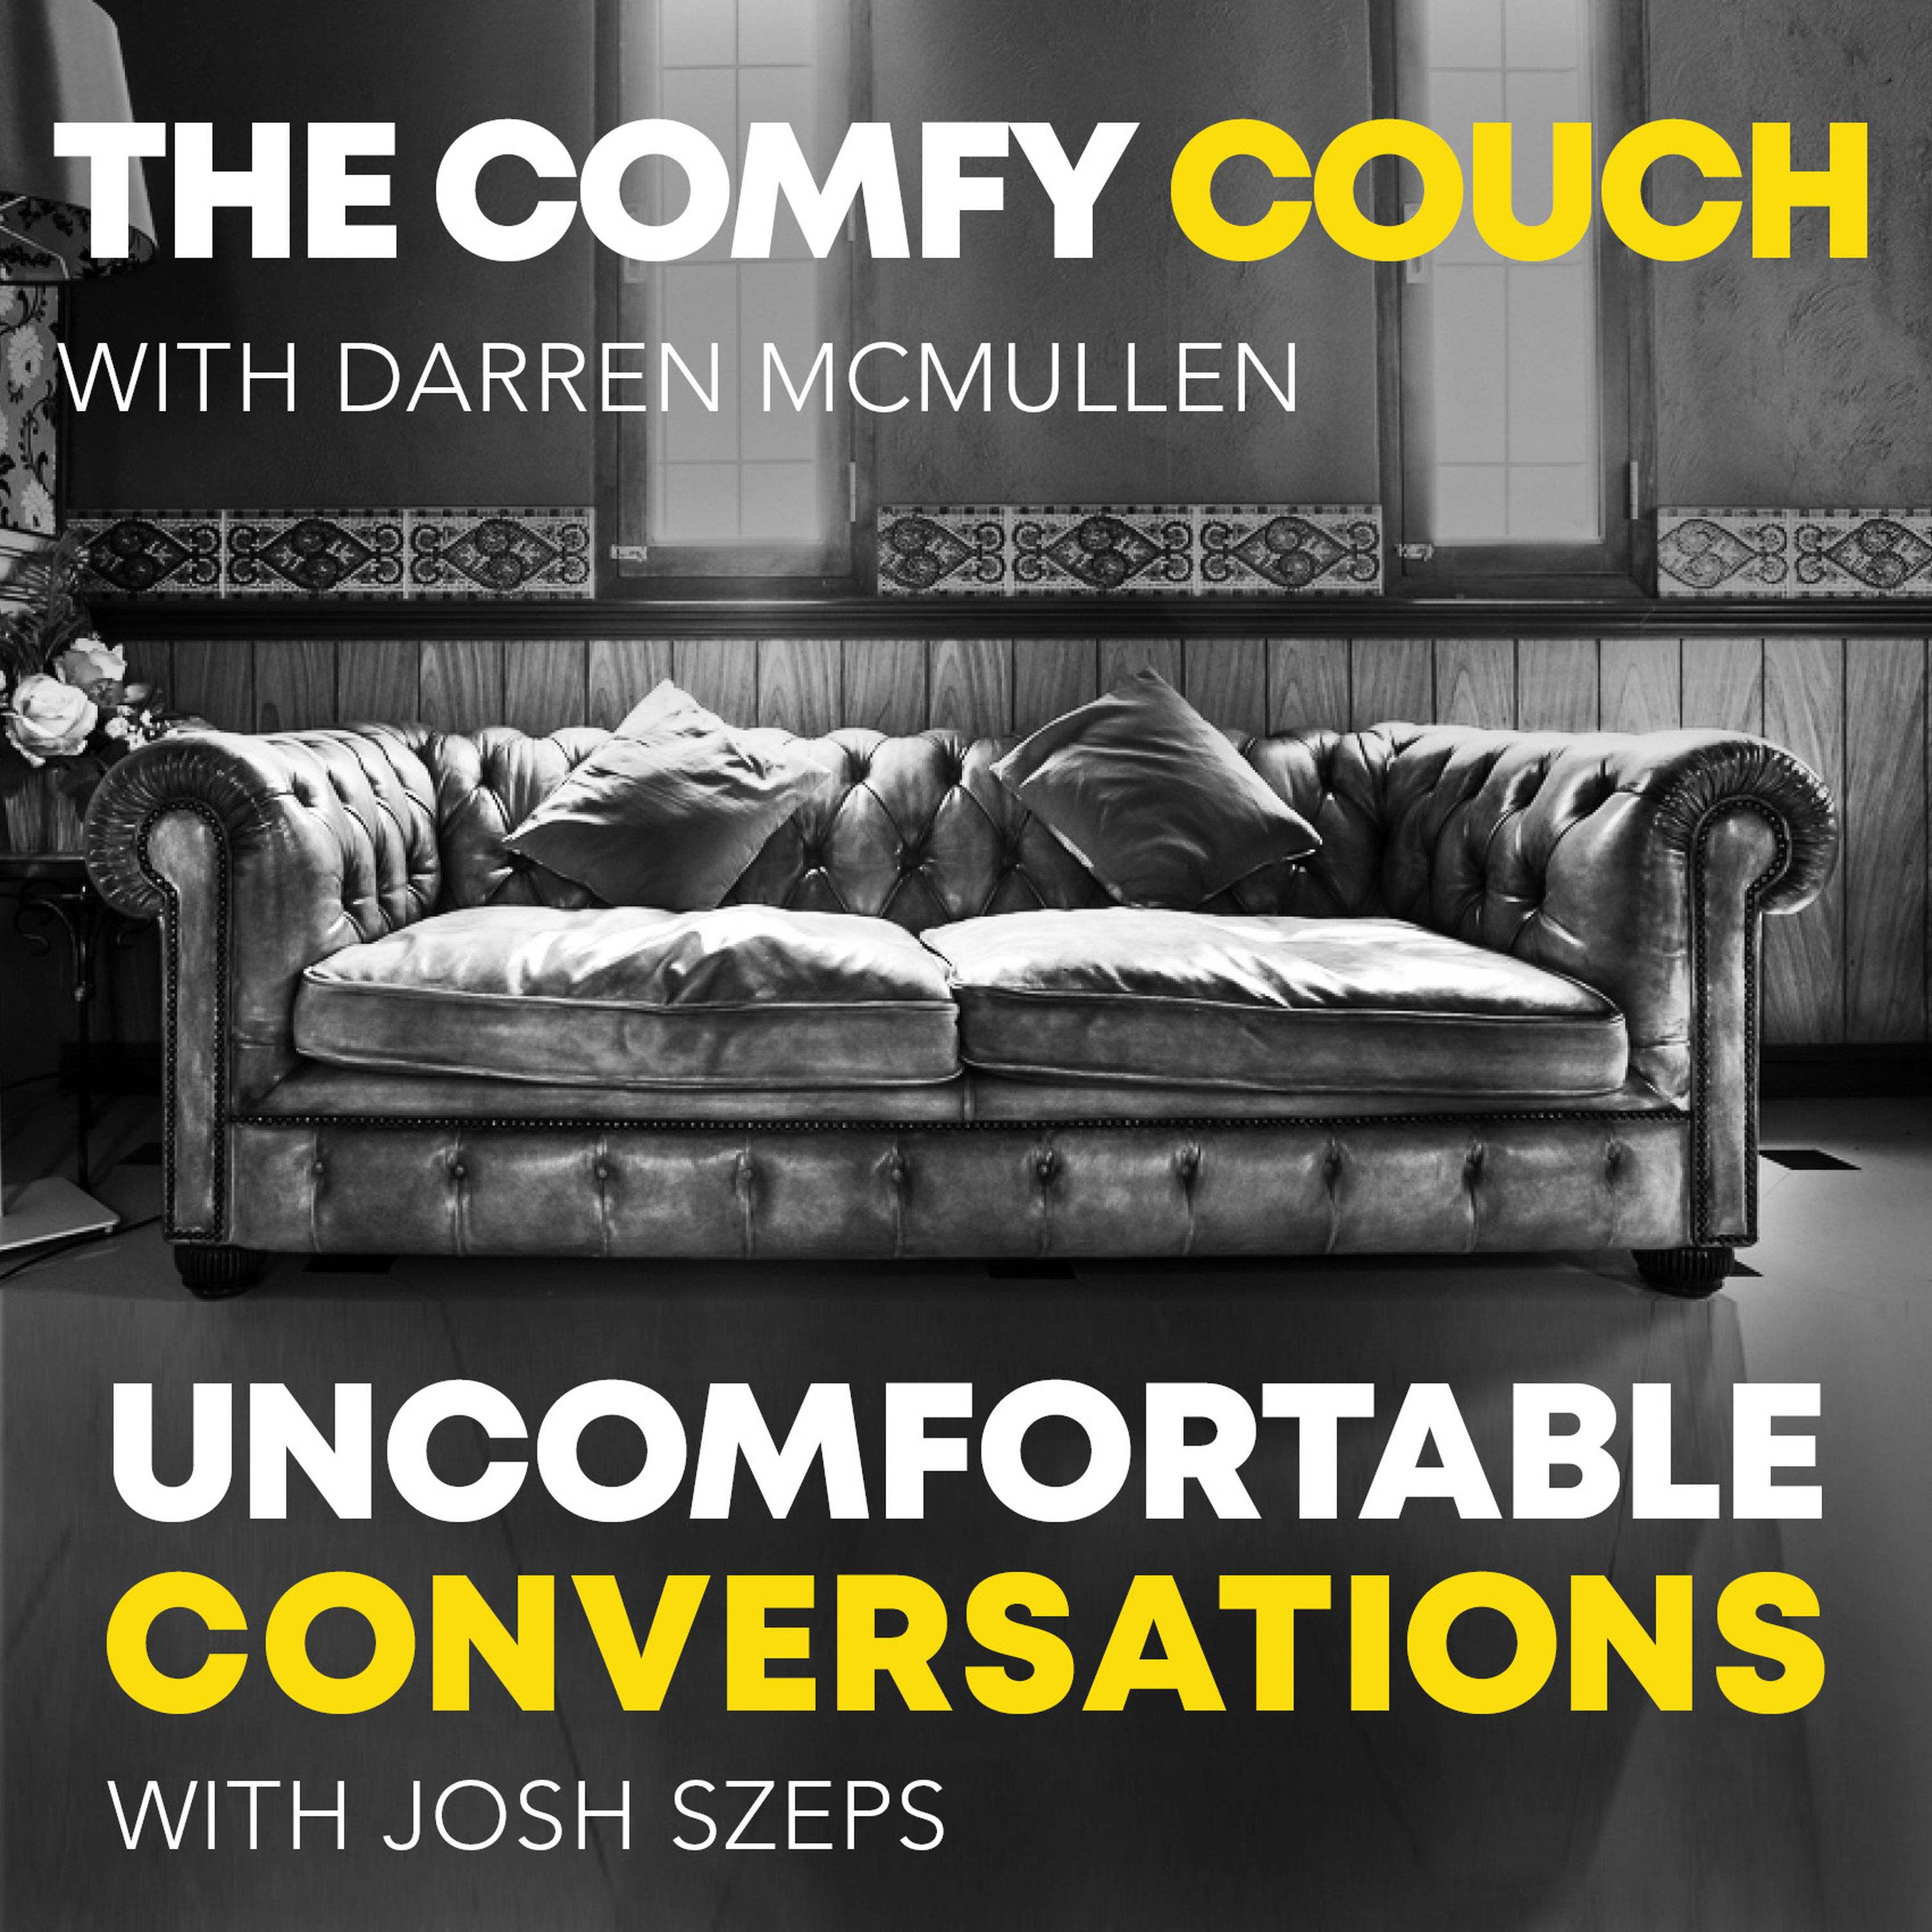 Darren McMullen joins the Comfy Couch